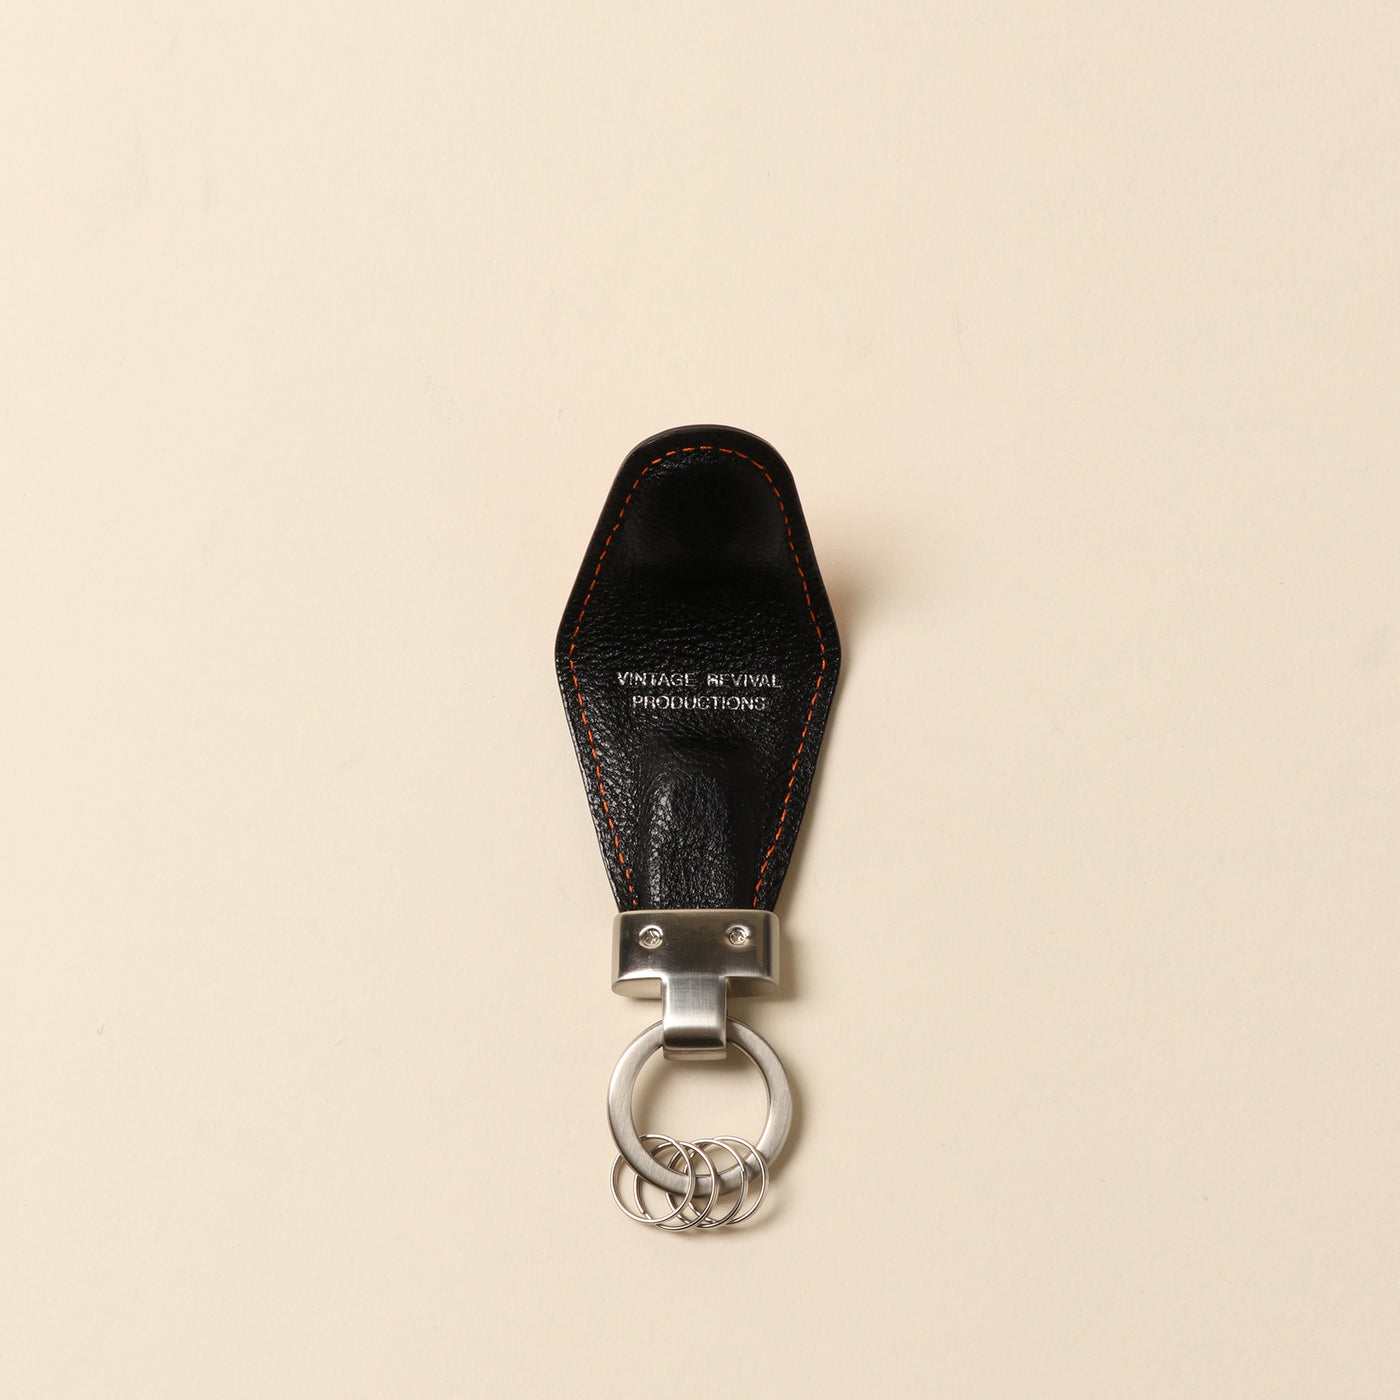 ＜VINTAGE REVIVAL PRODUCTIONS> Key clip calf leather/yellow